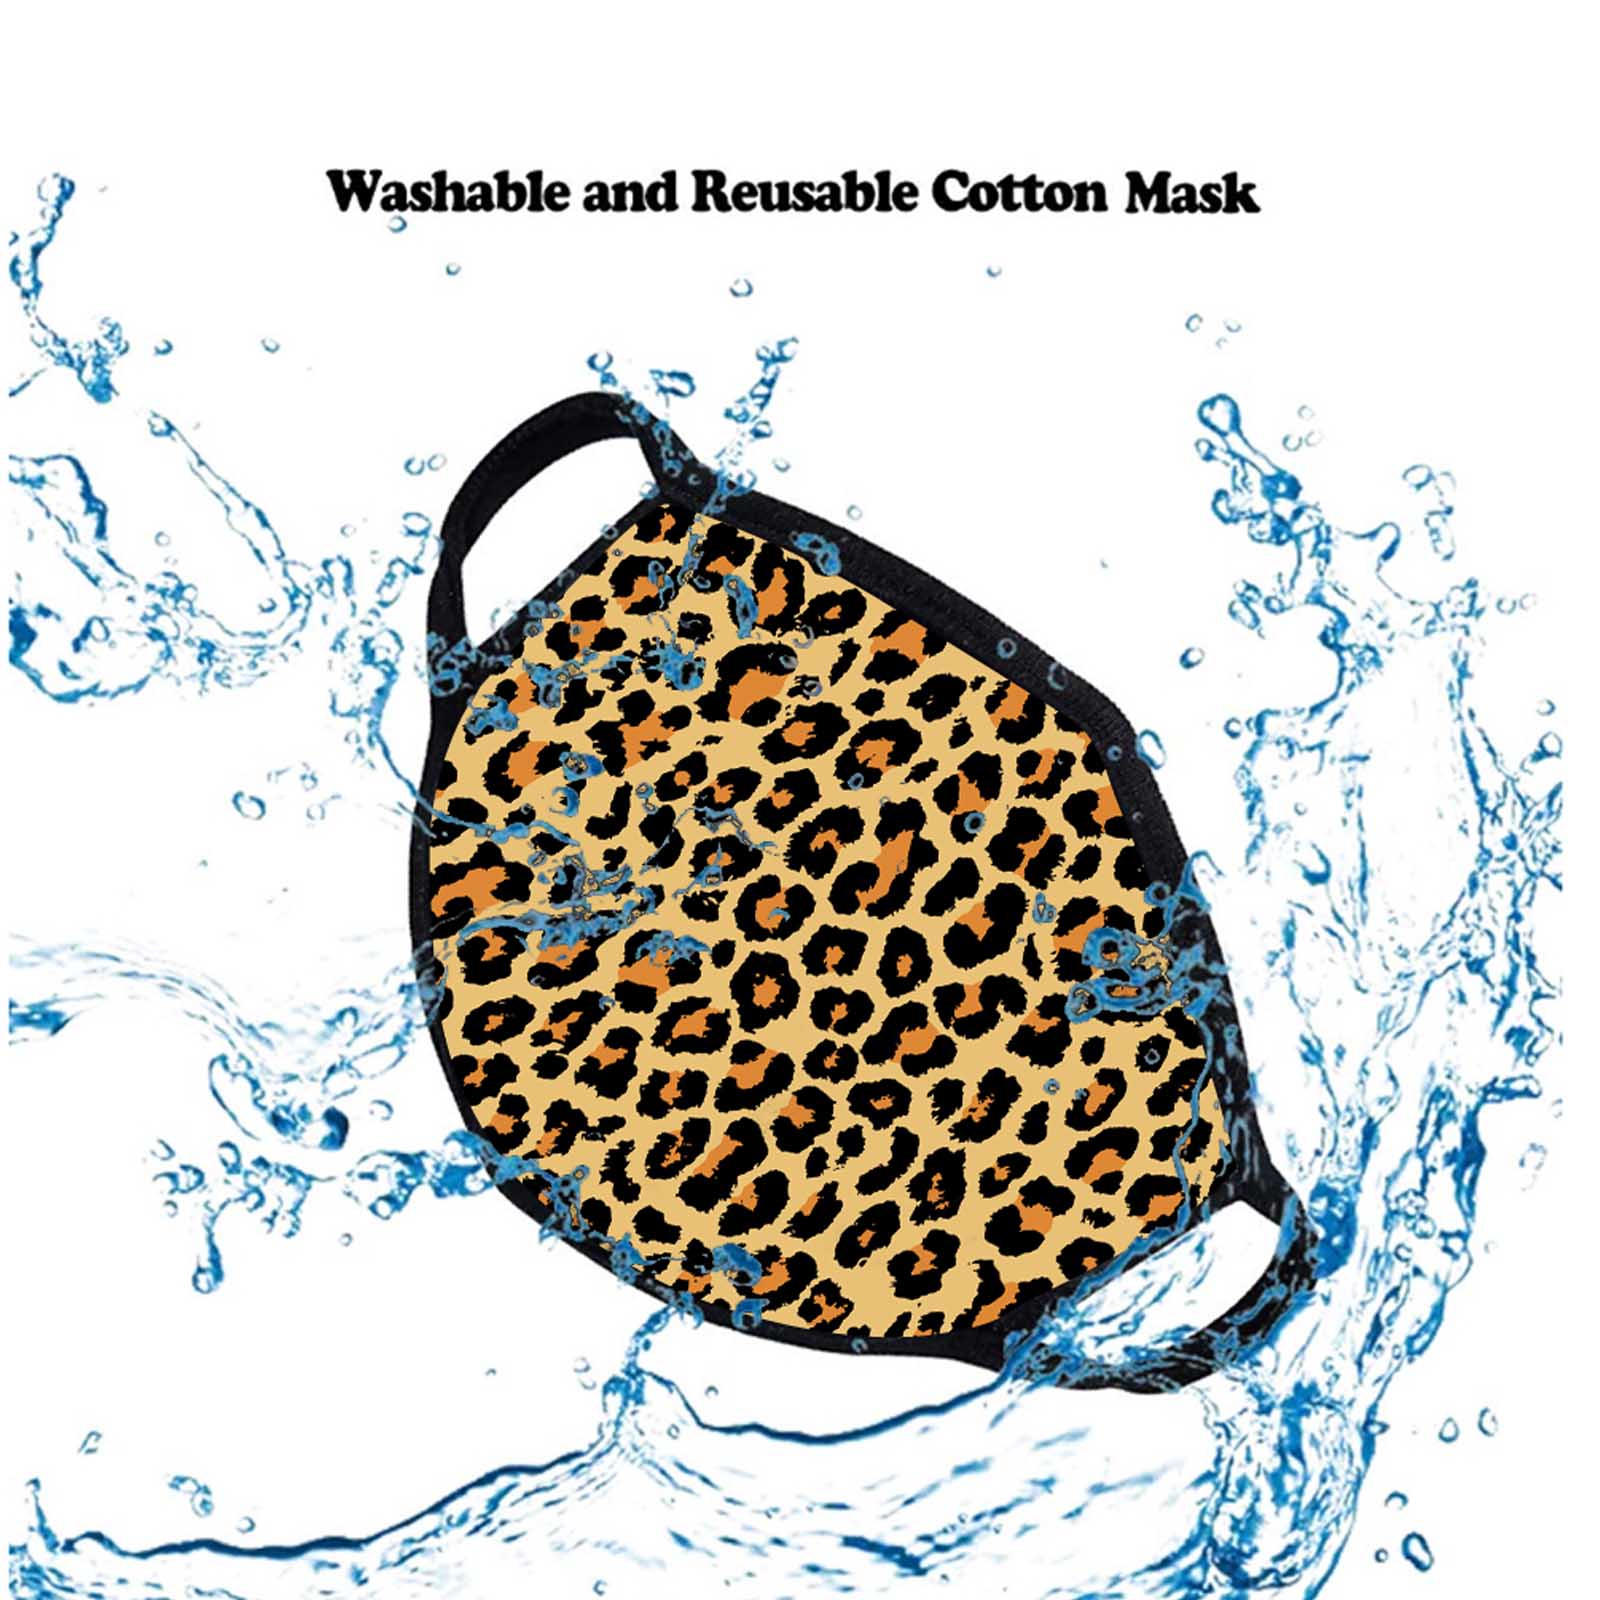 FCM-002 Leopard Print Fabric Face Mask Double Layer Set of 2